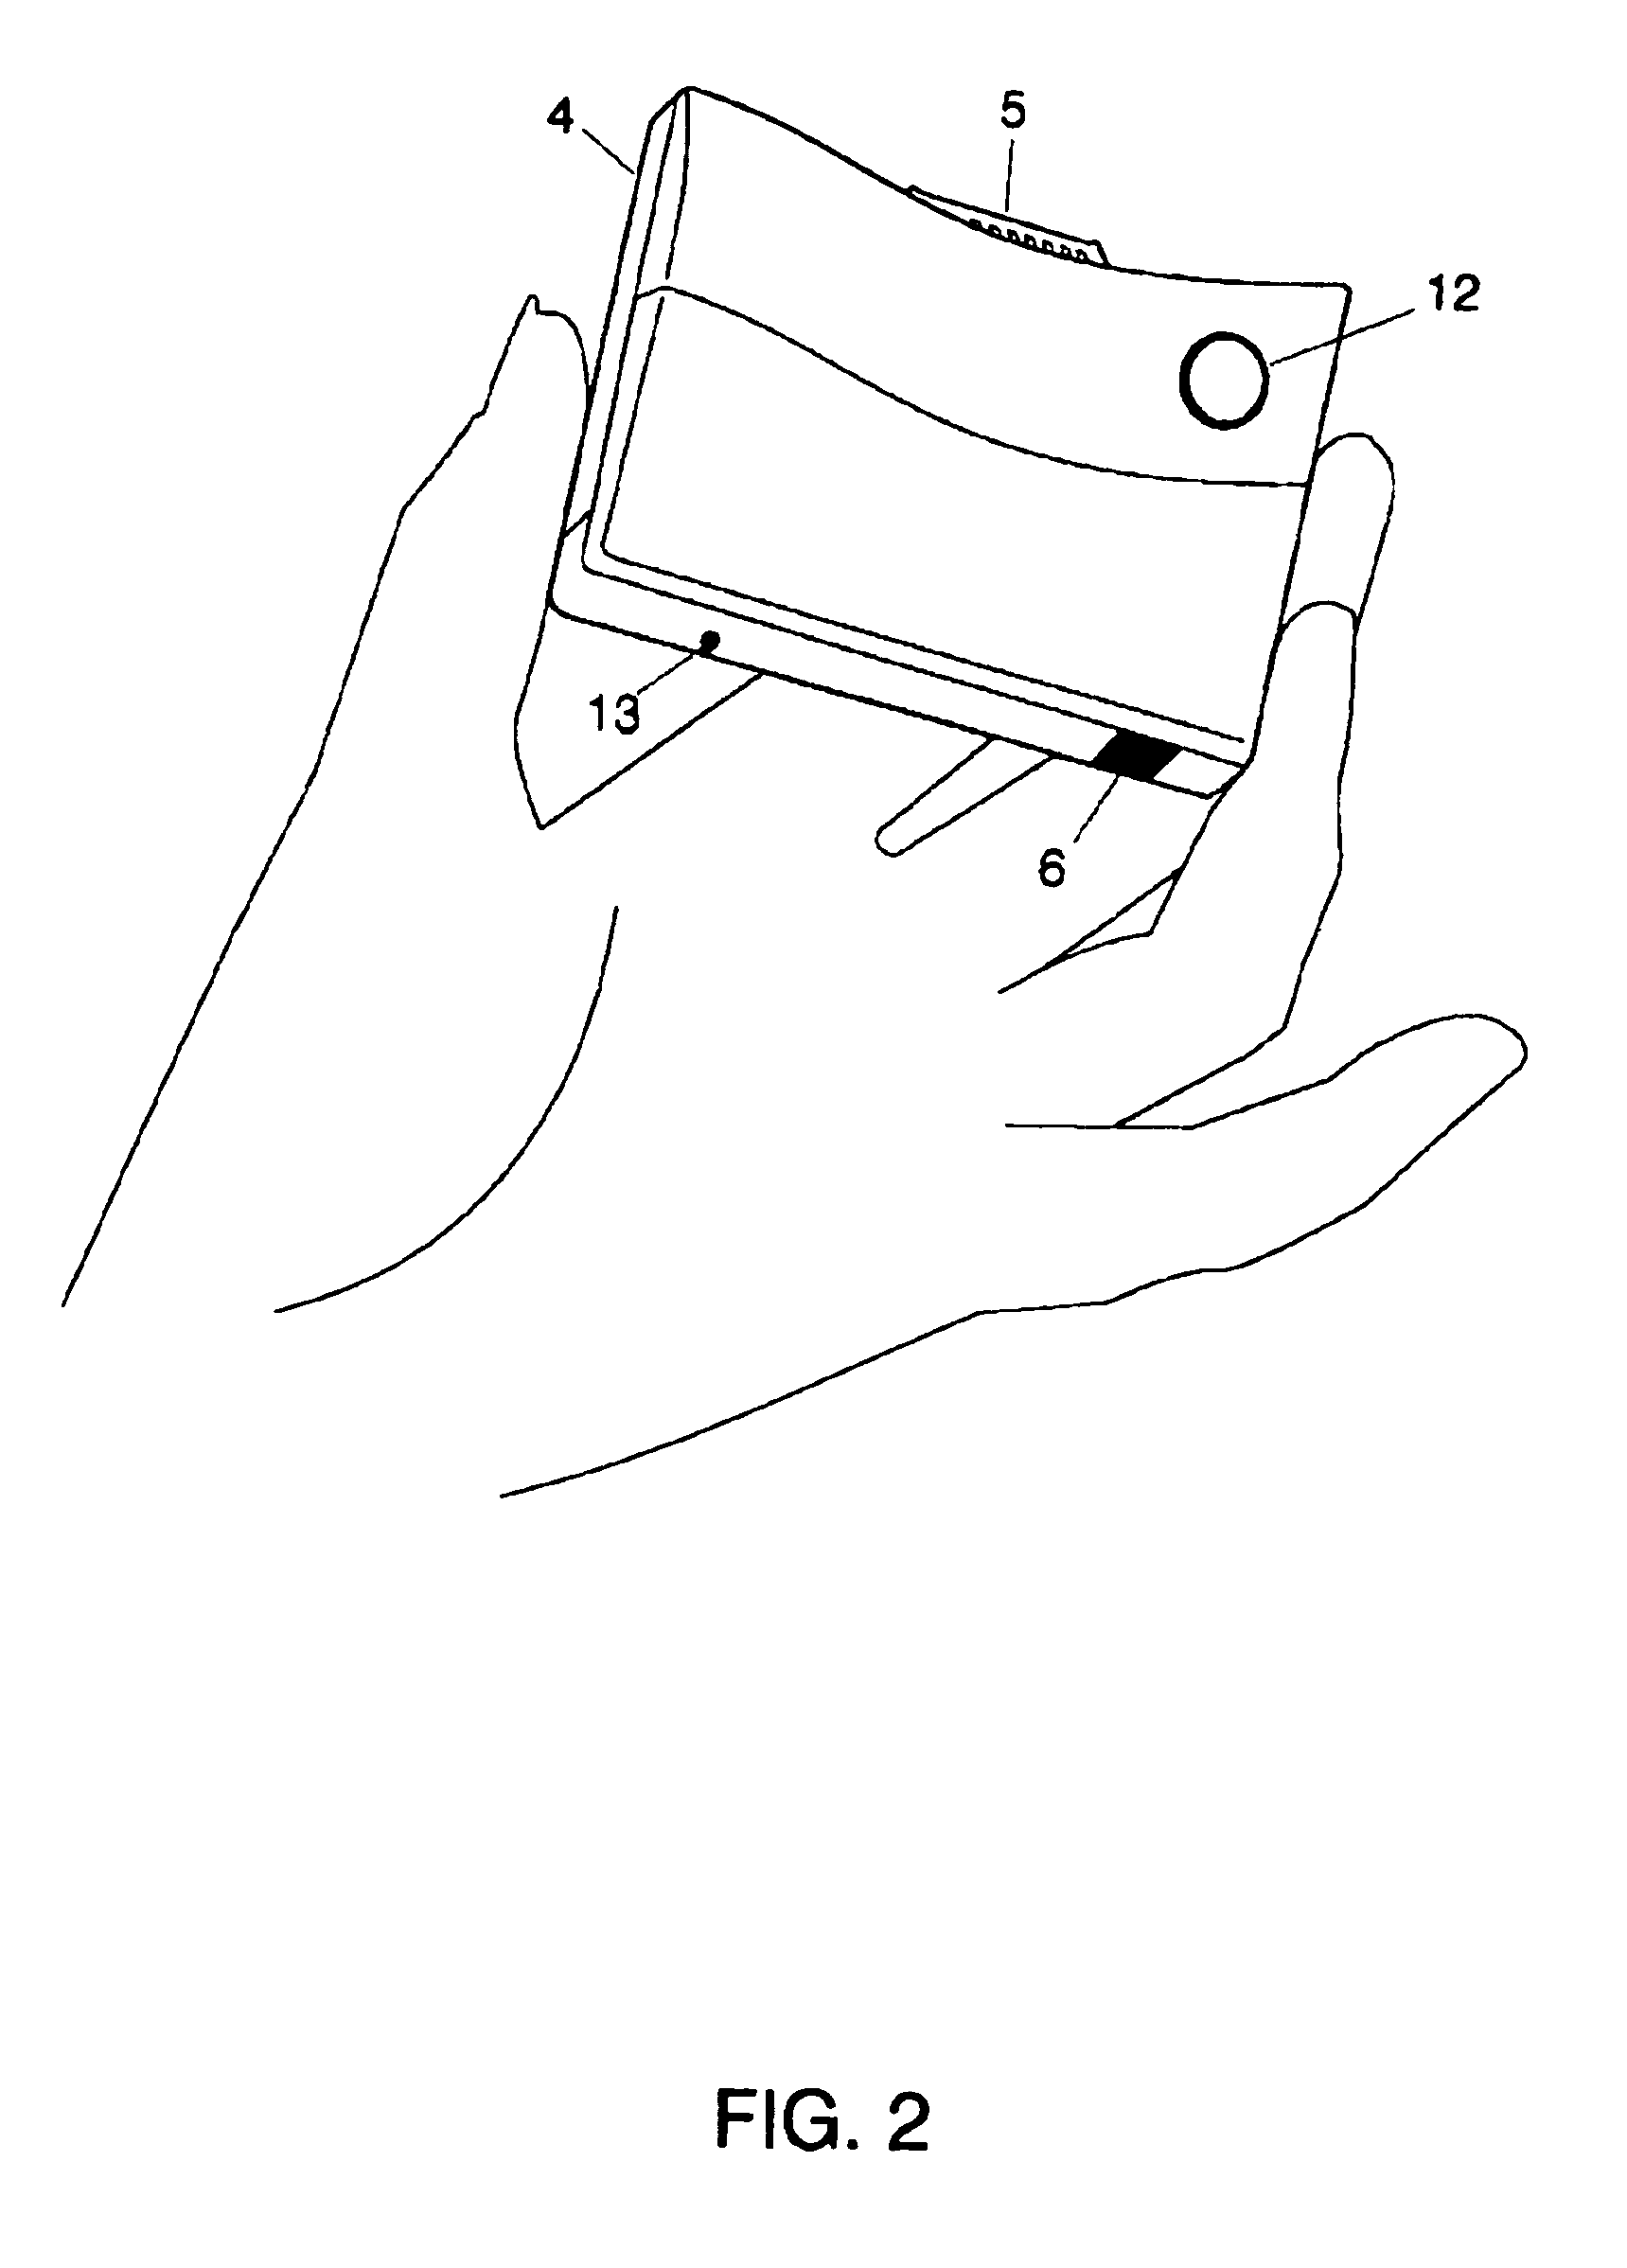 Hand-held computer device and method for interactive data acquisition, analysis, annotation, and calibration